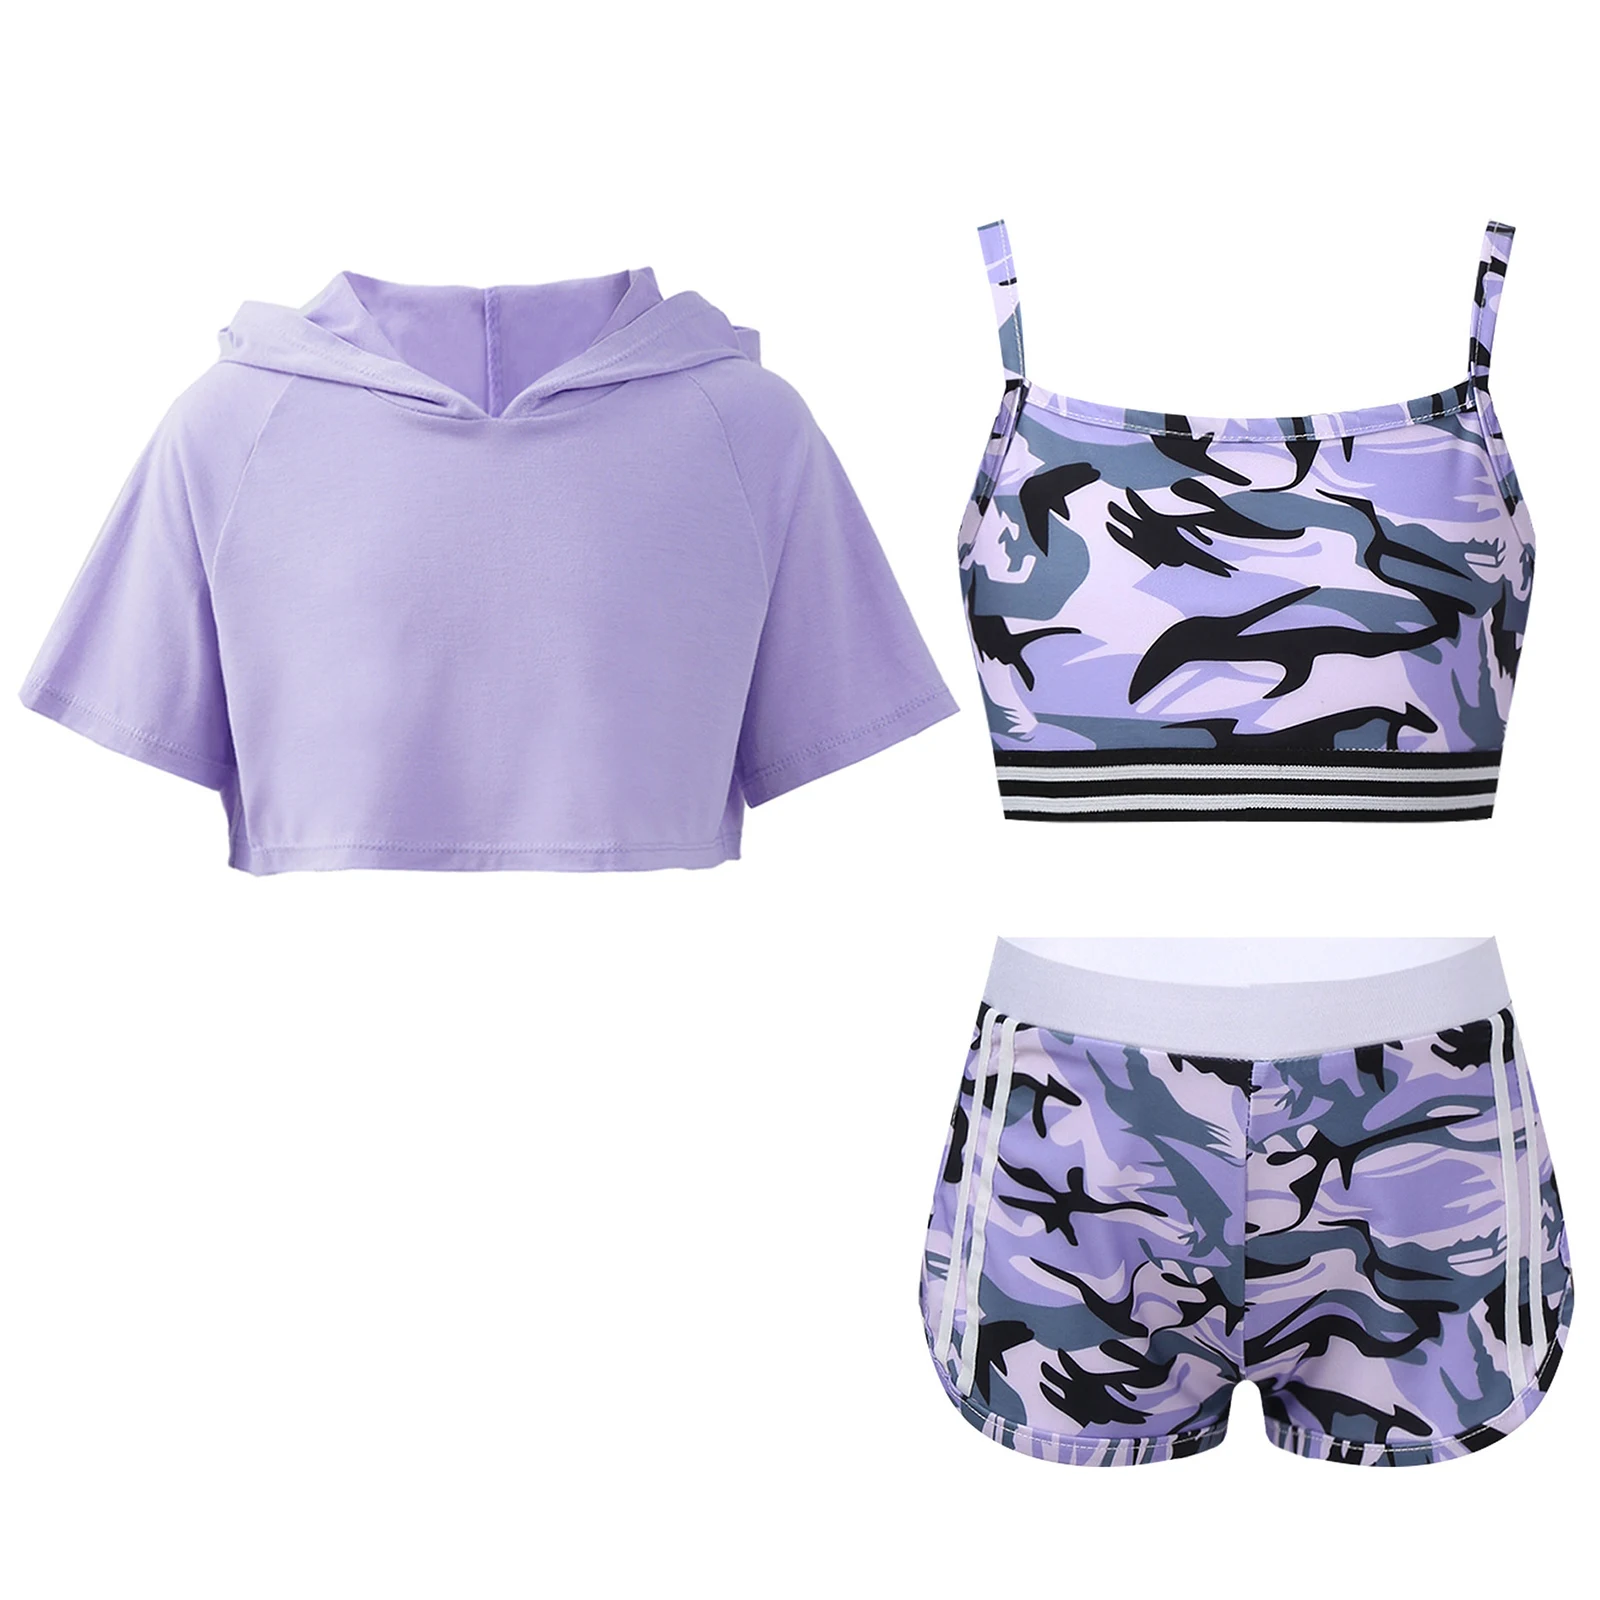 

Kids Girls Sports Set Casual Tracksuit Camouflage Camisole+Shorts+Short Sleeve Hooded Crop Top for Gymnastics Workout Fitness